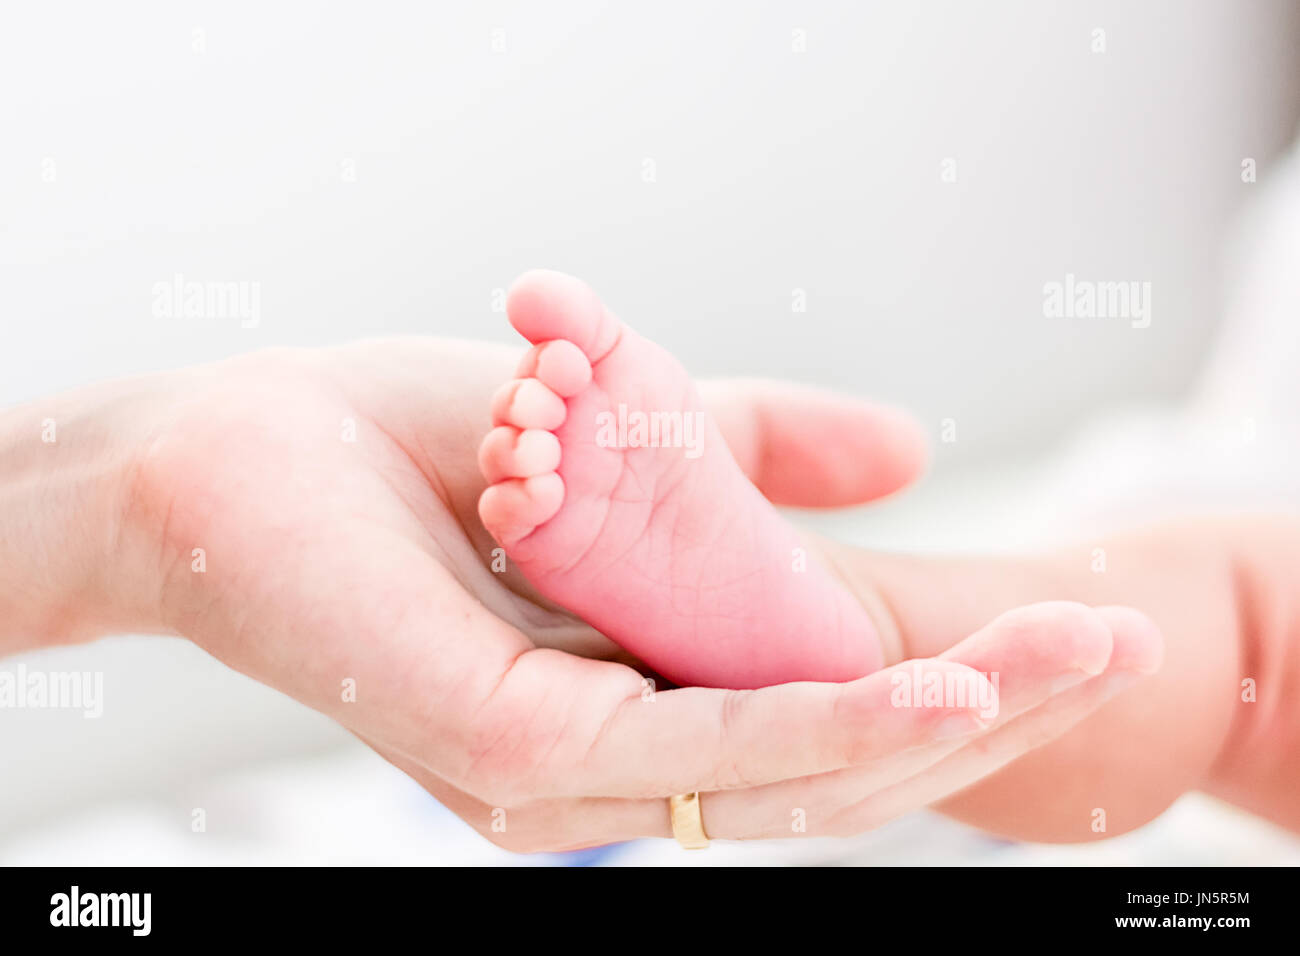 Baby feet in mother hands againt blurred background Stock Photo